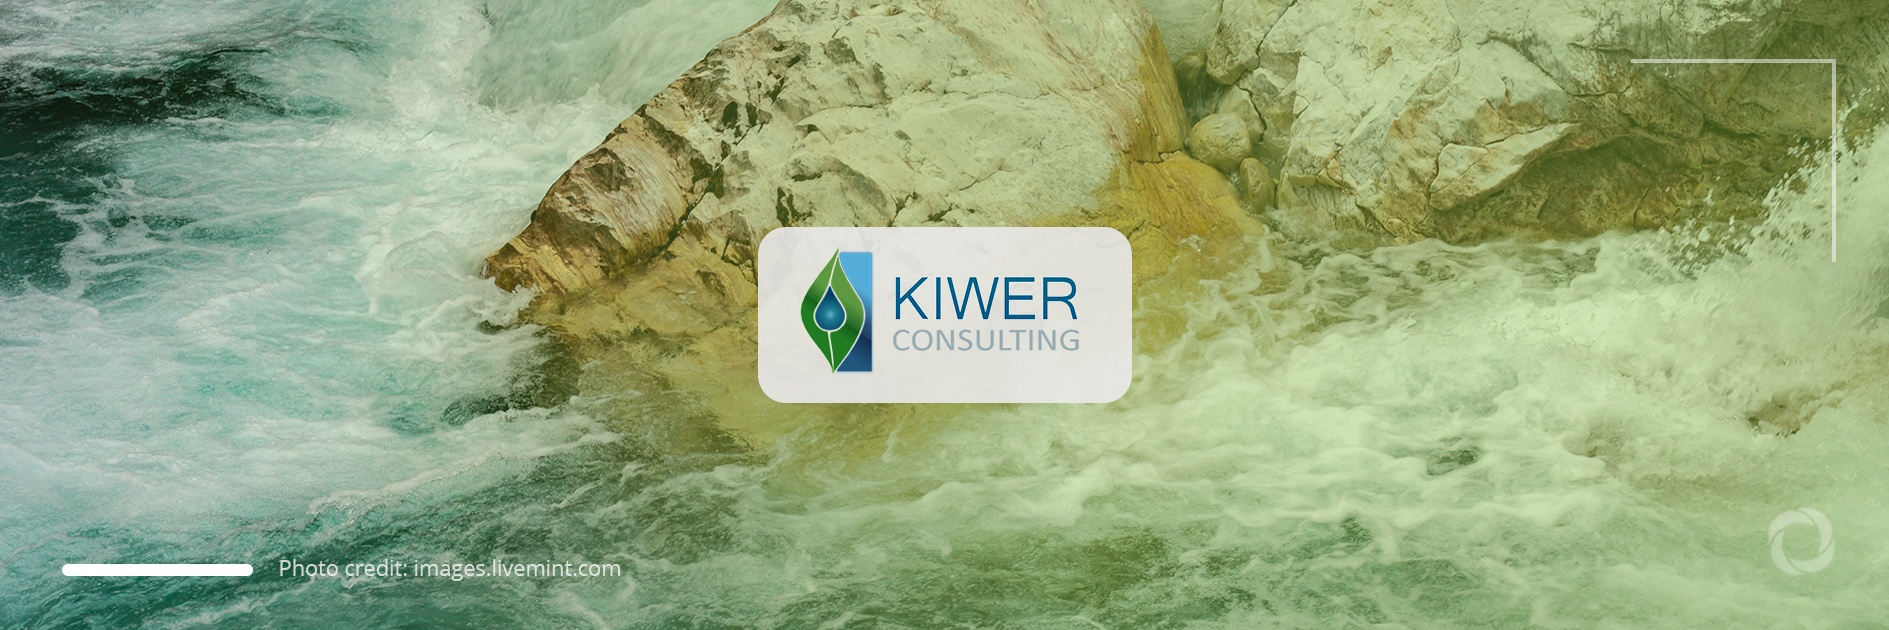 KIWER. Reliable project partner from Balkans | DevelopmentAid Members's Profile